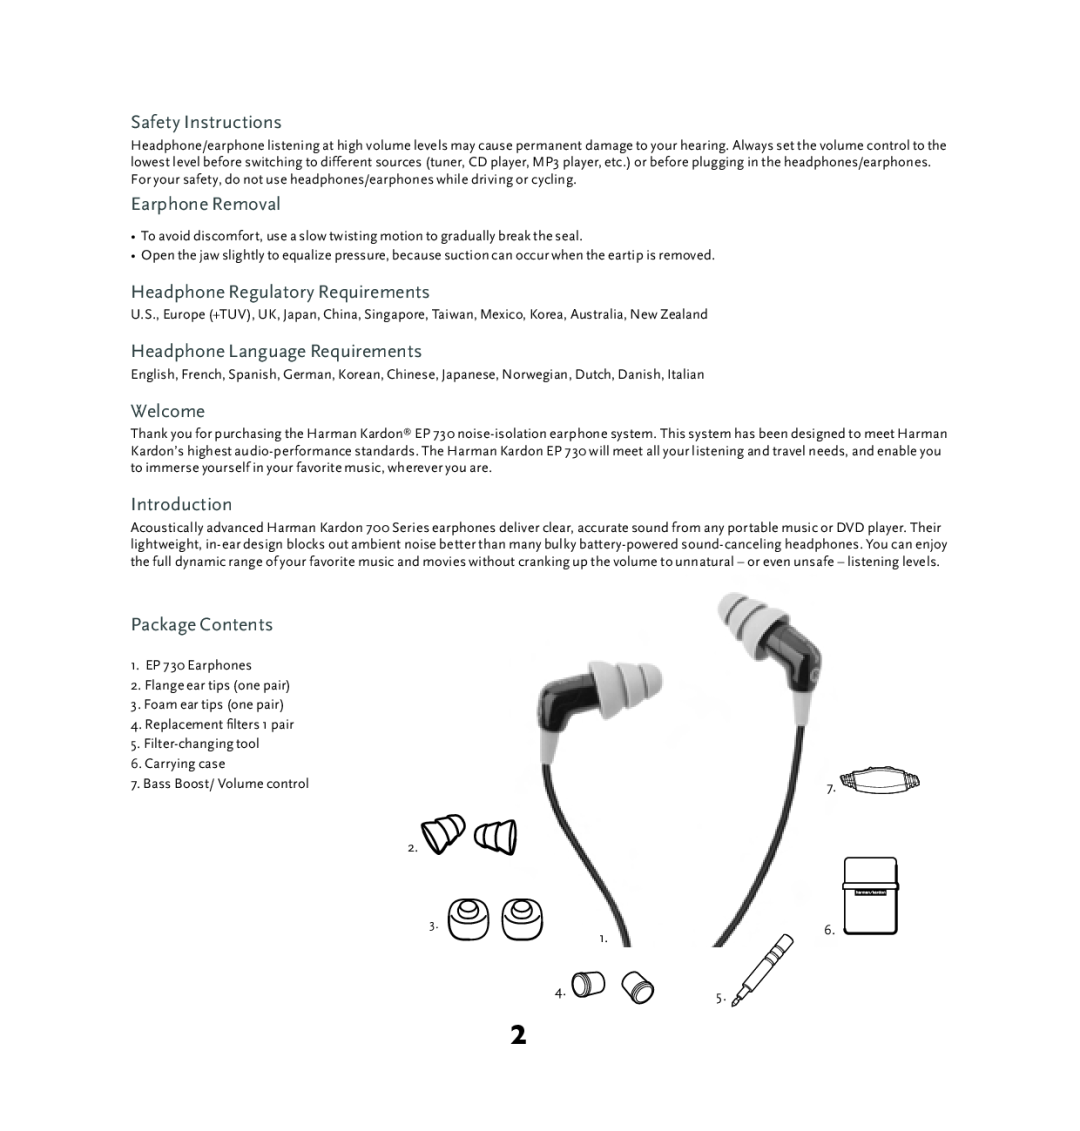 Harman-Kardon EP 730 manual Safety Instructions, Earphone Removal, Headphone Regulatory Requirements, Welcome, Introduction 